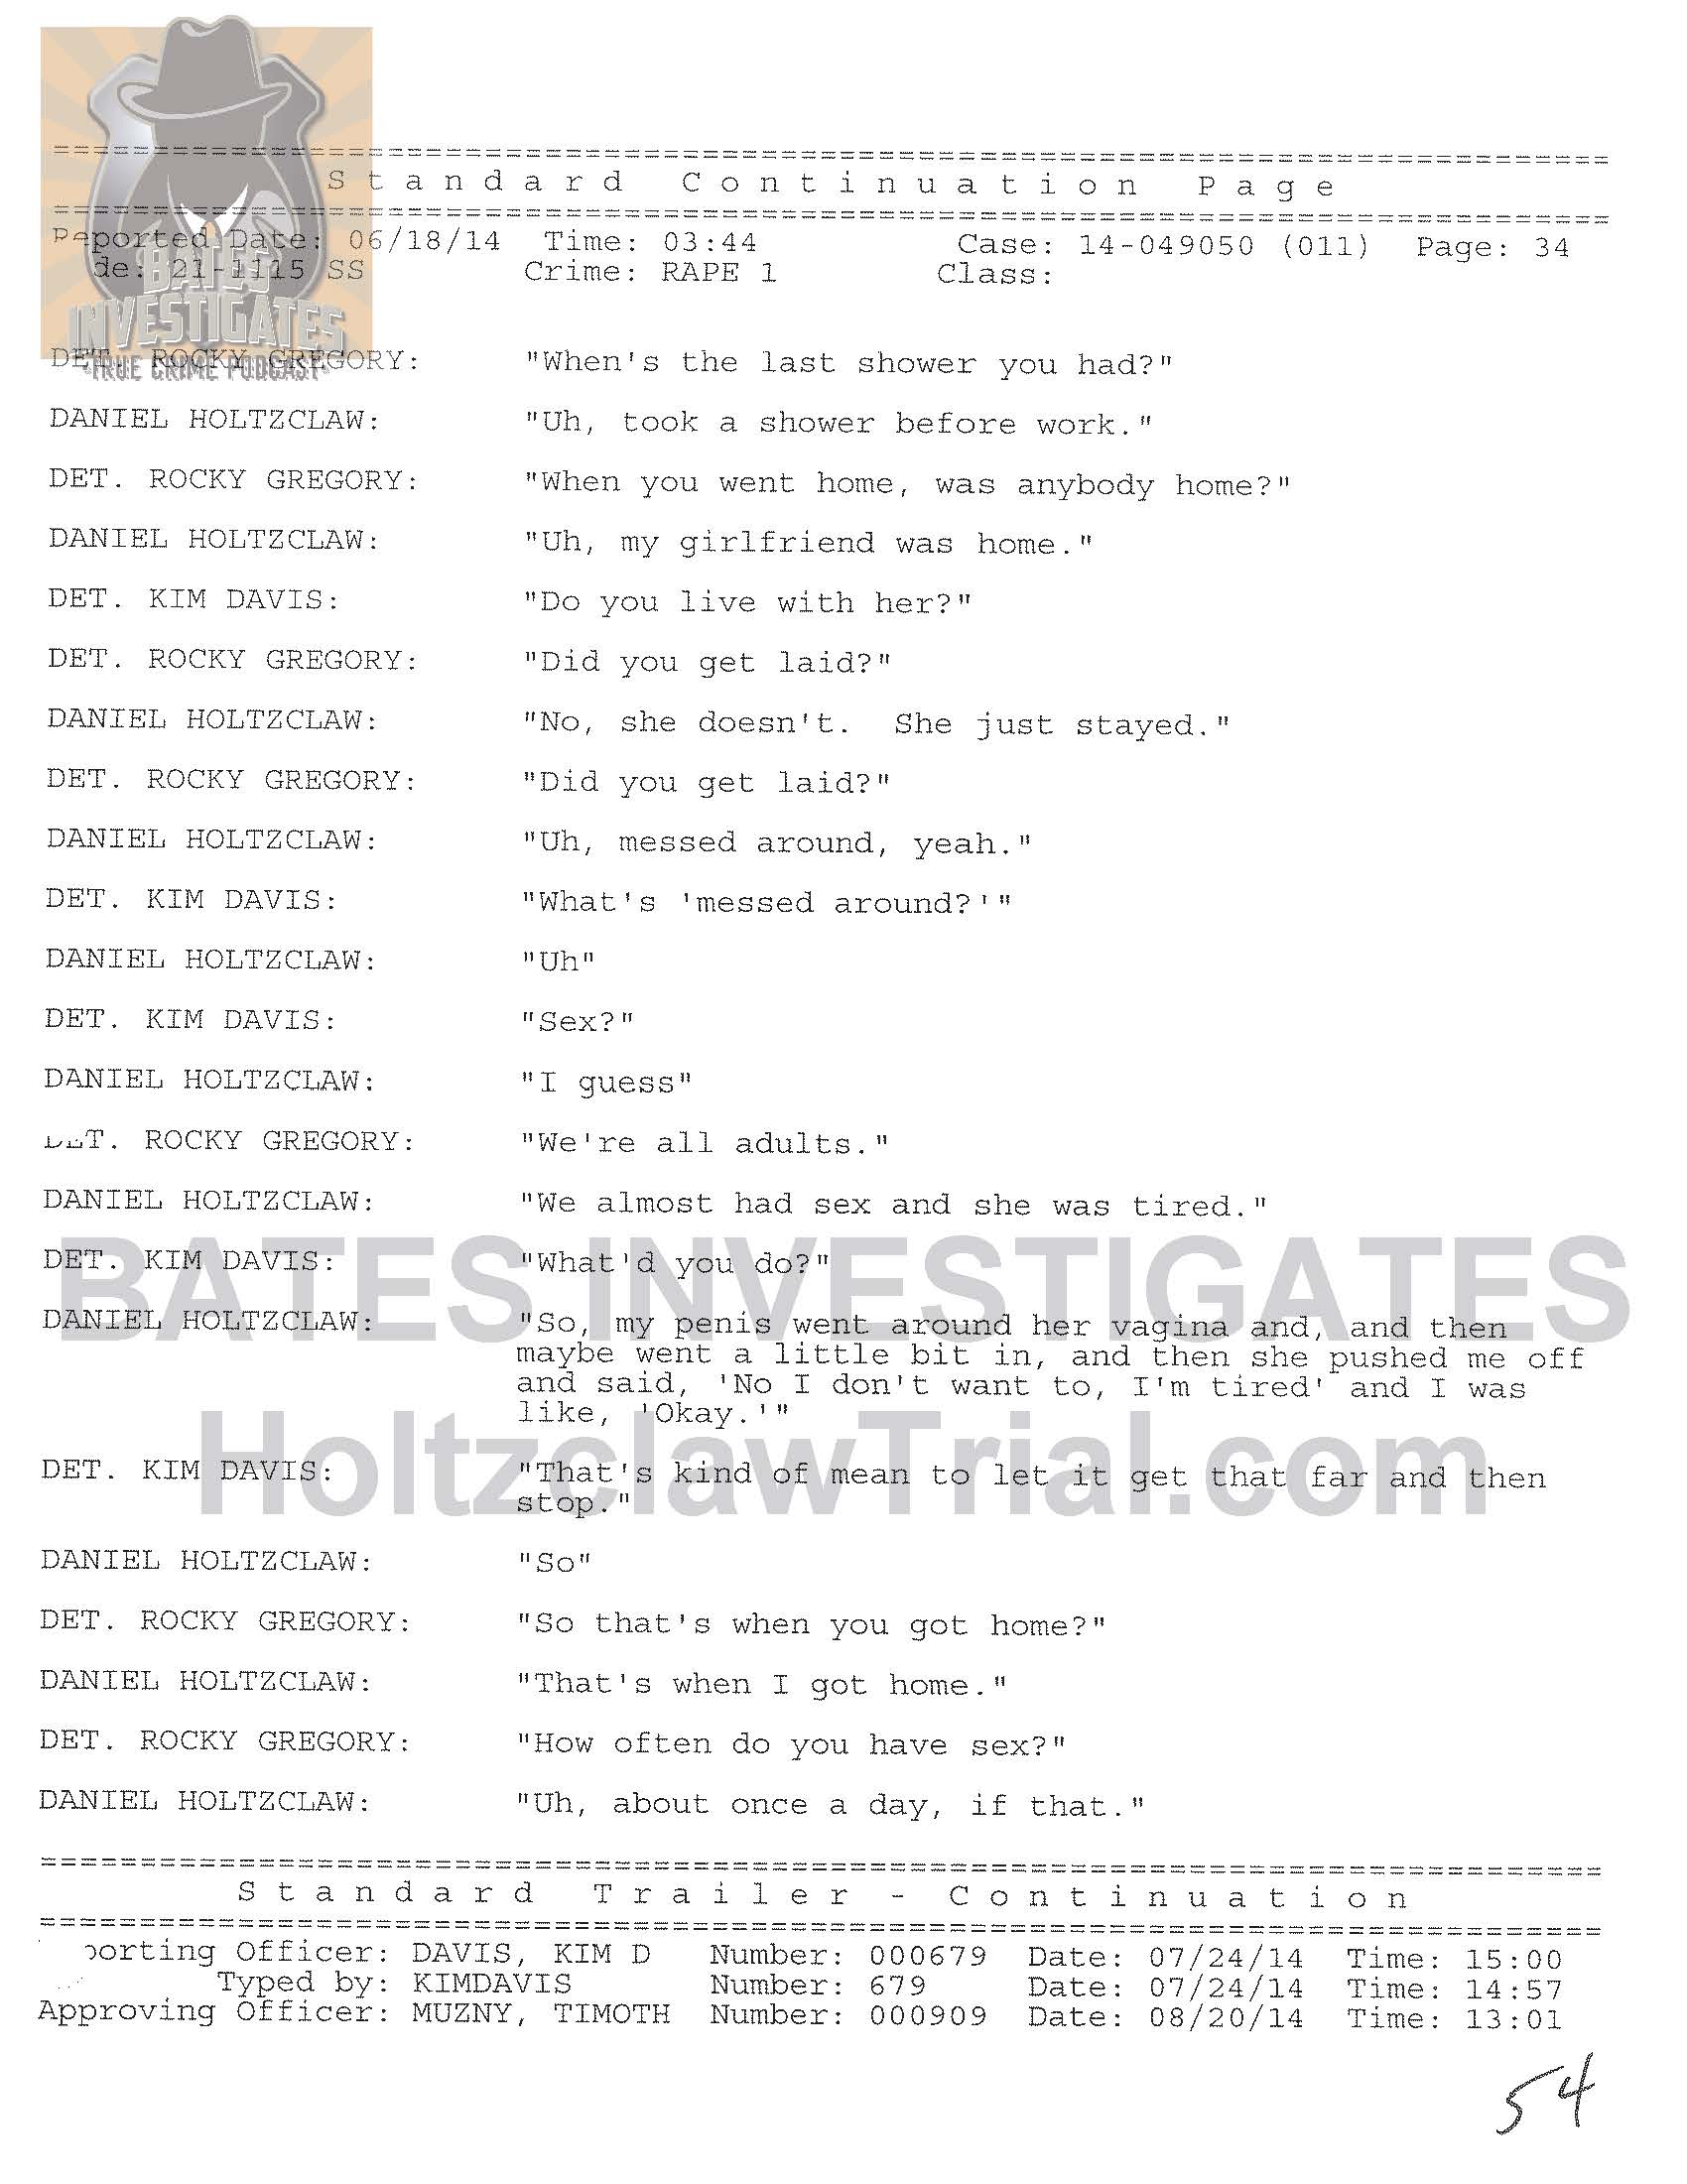 Holtzclaw Interrogation Transcript - Ep02 Redacted_Page_34.jpg